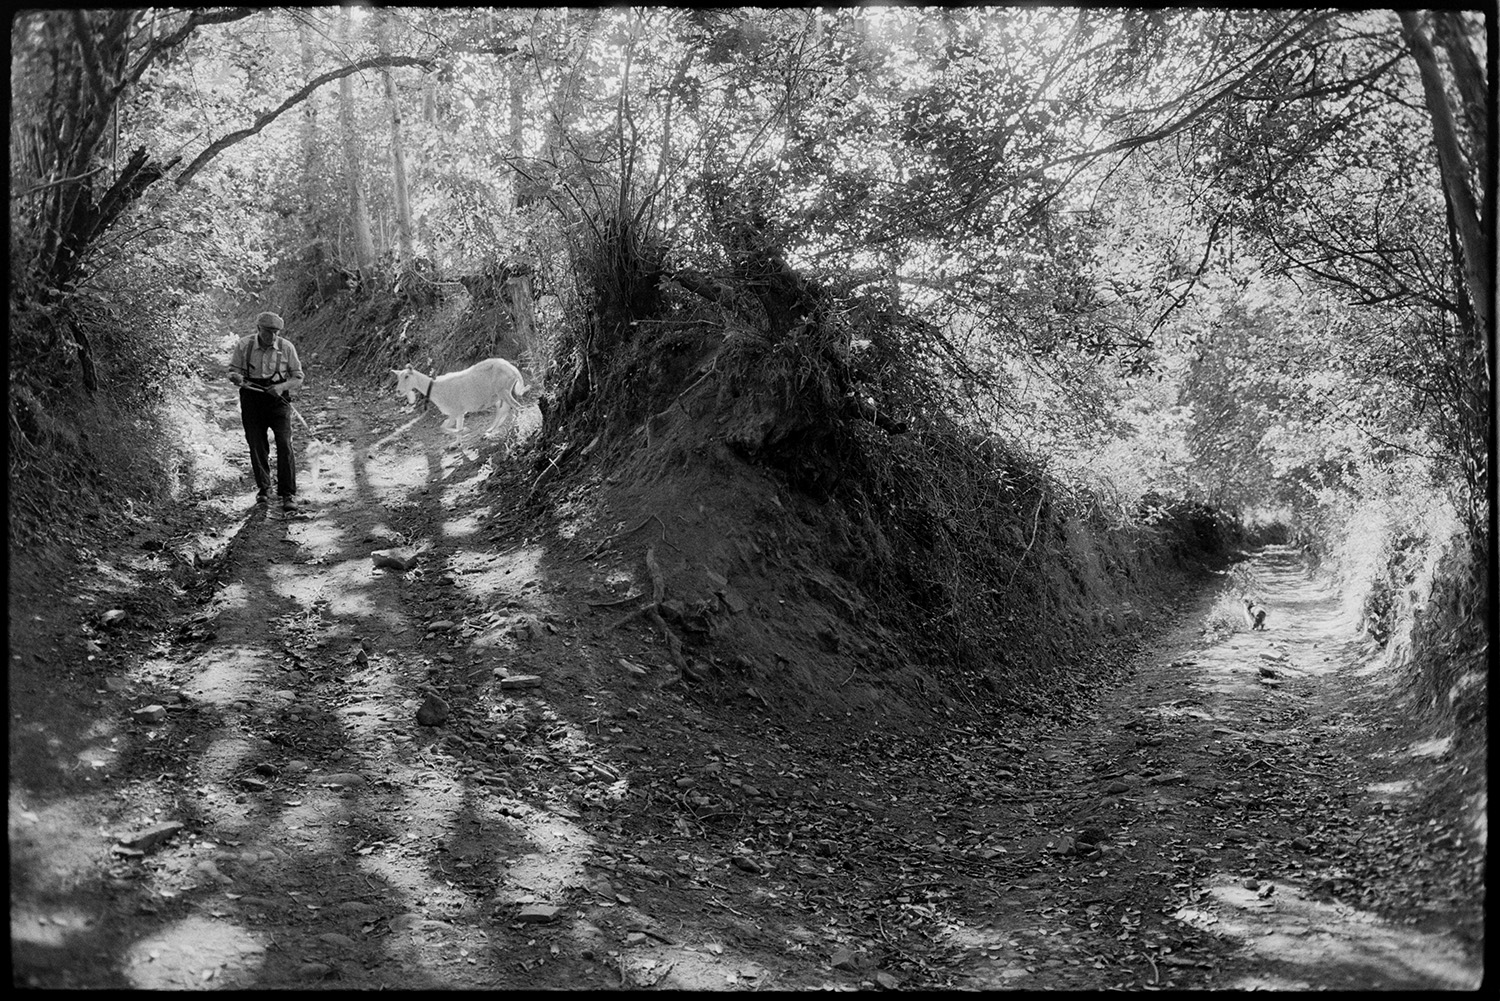 Farmer tethering goats.<br />
[George Ayre leading a goat on a tether along a sunlit tree lined sunken lane, at Millhams, Dolton. A cat is visible further along the lane.]